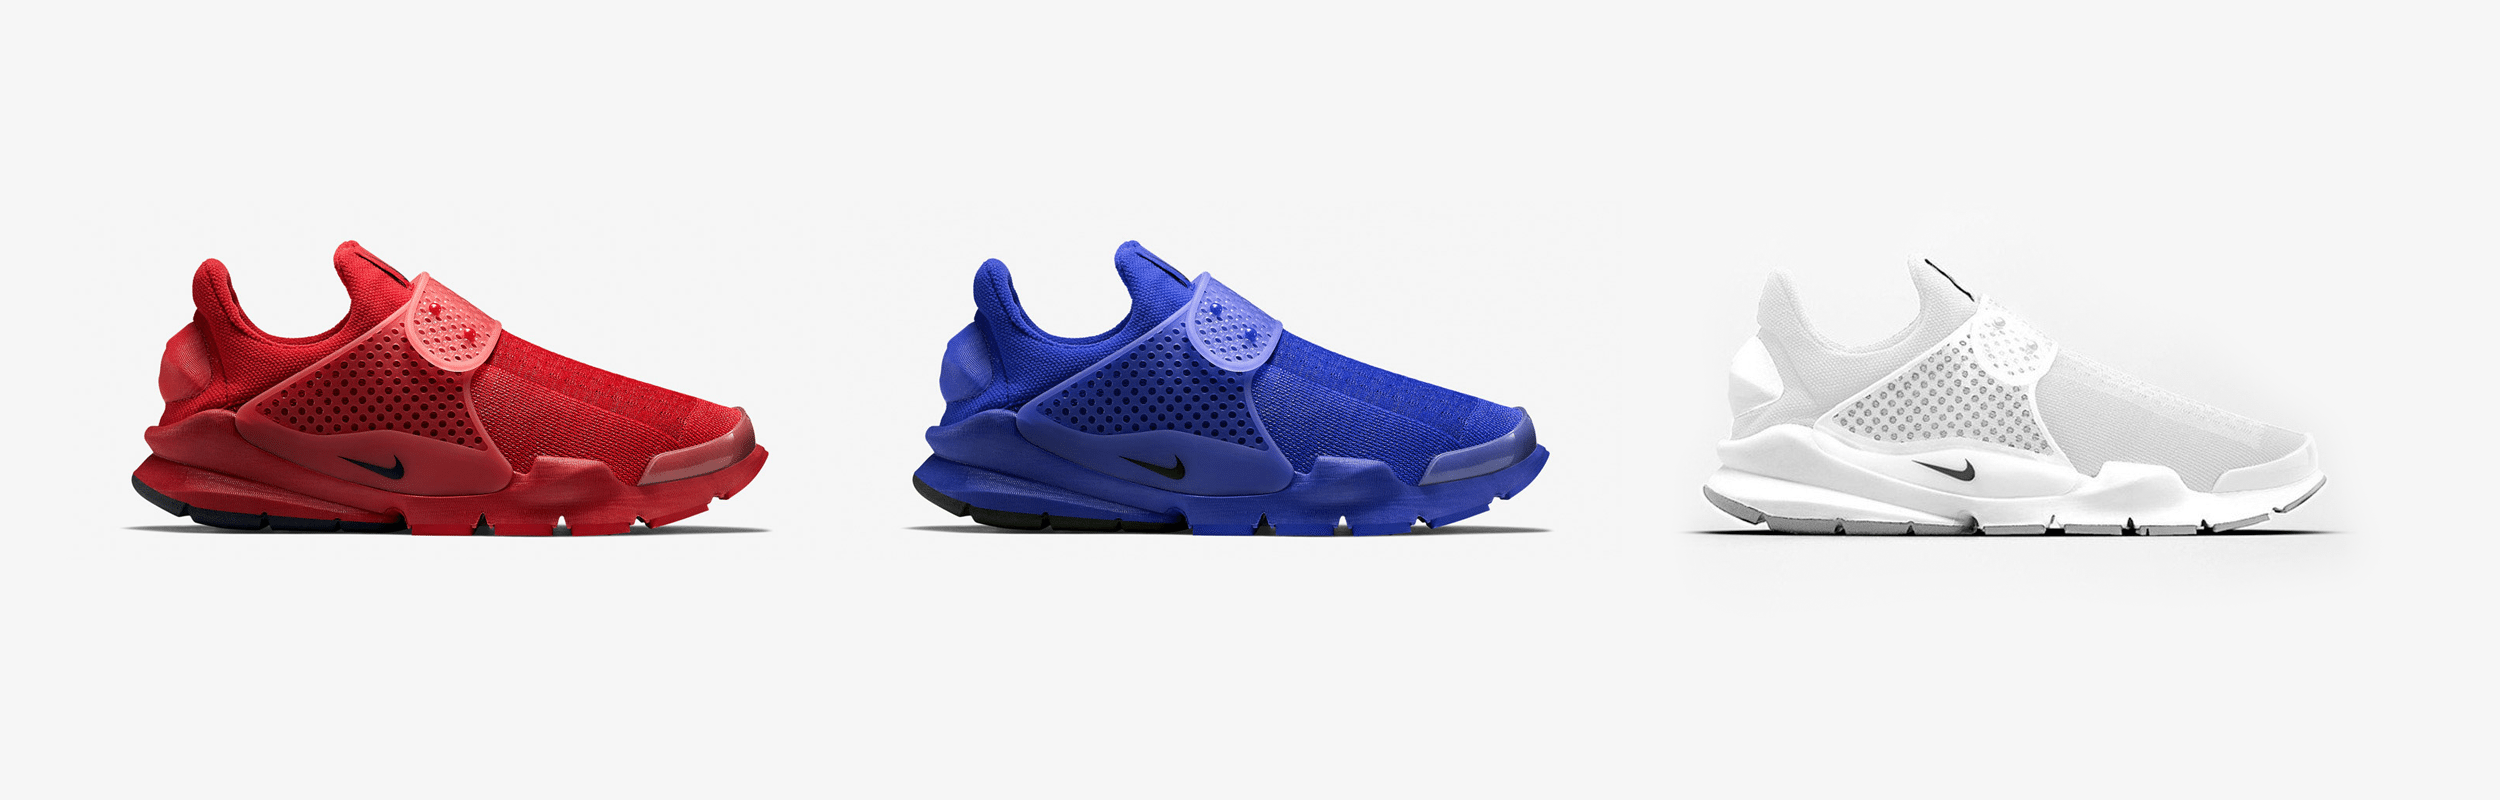 Nike Sock Dart SP Independence Day Pack